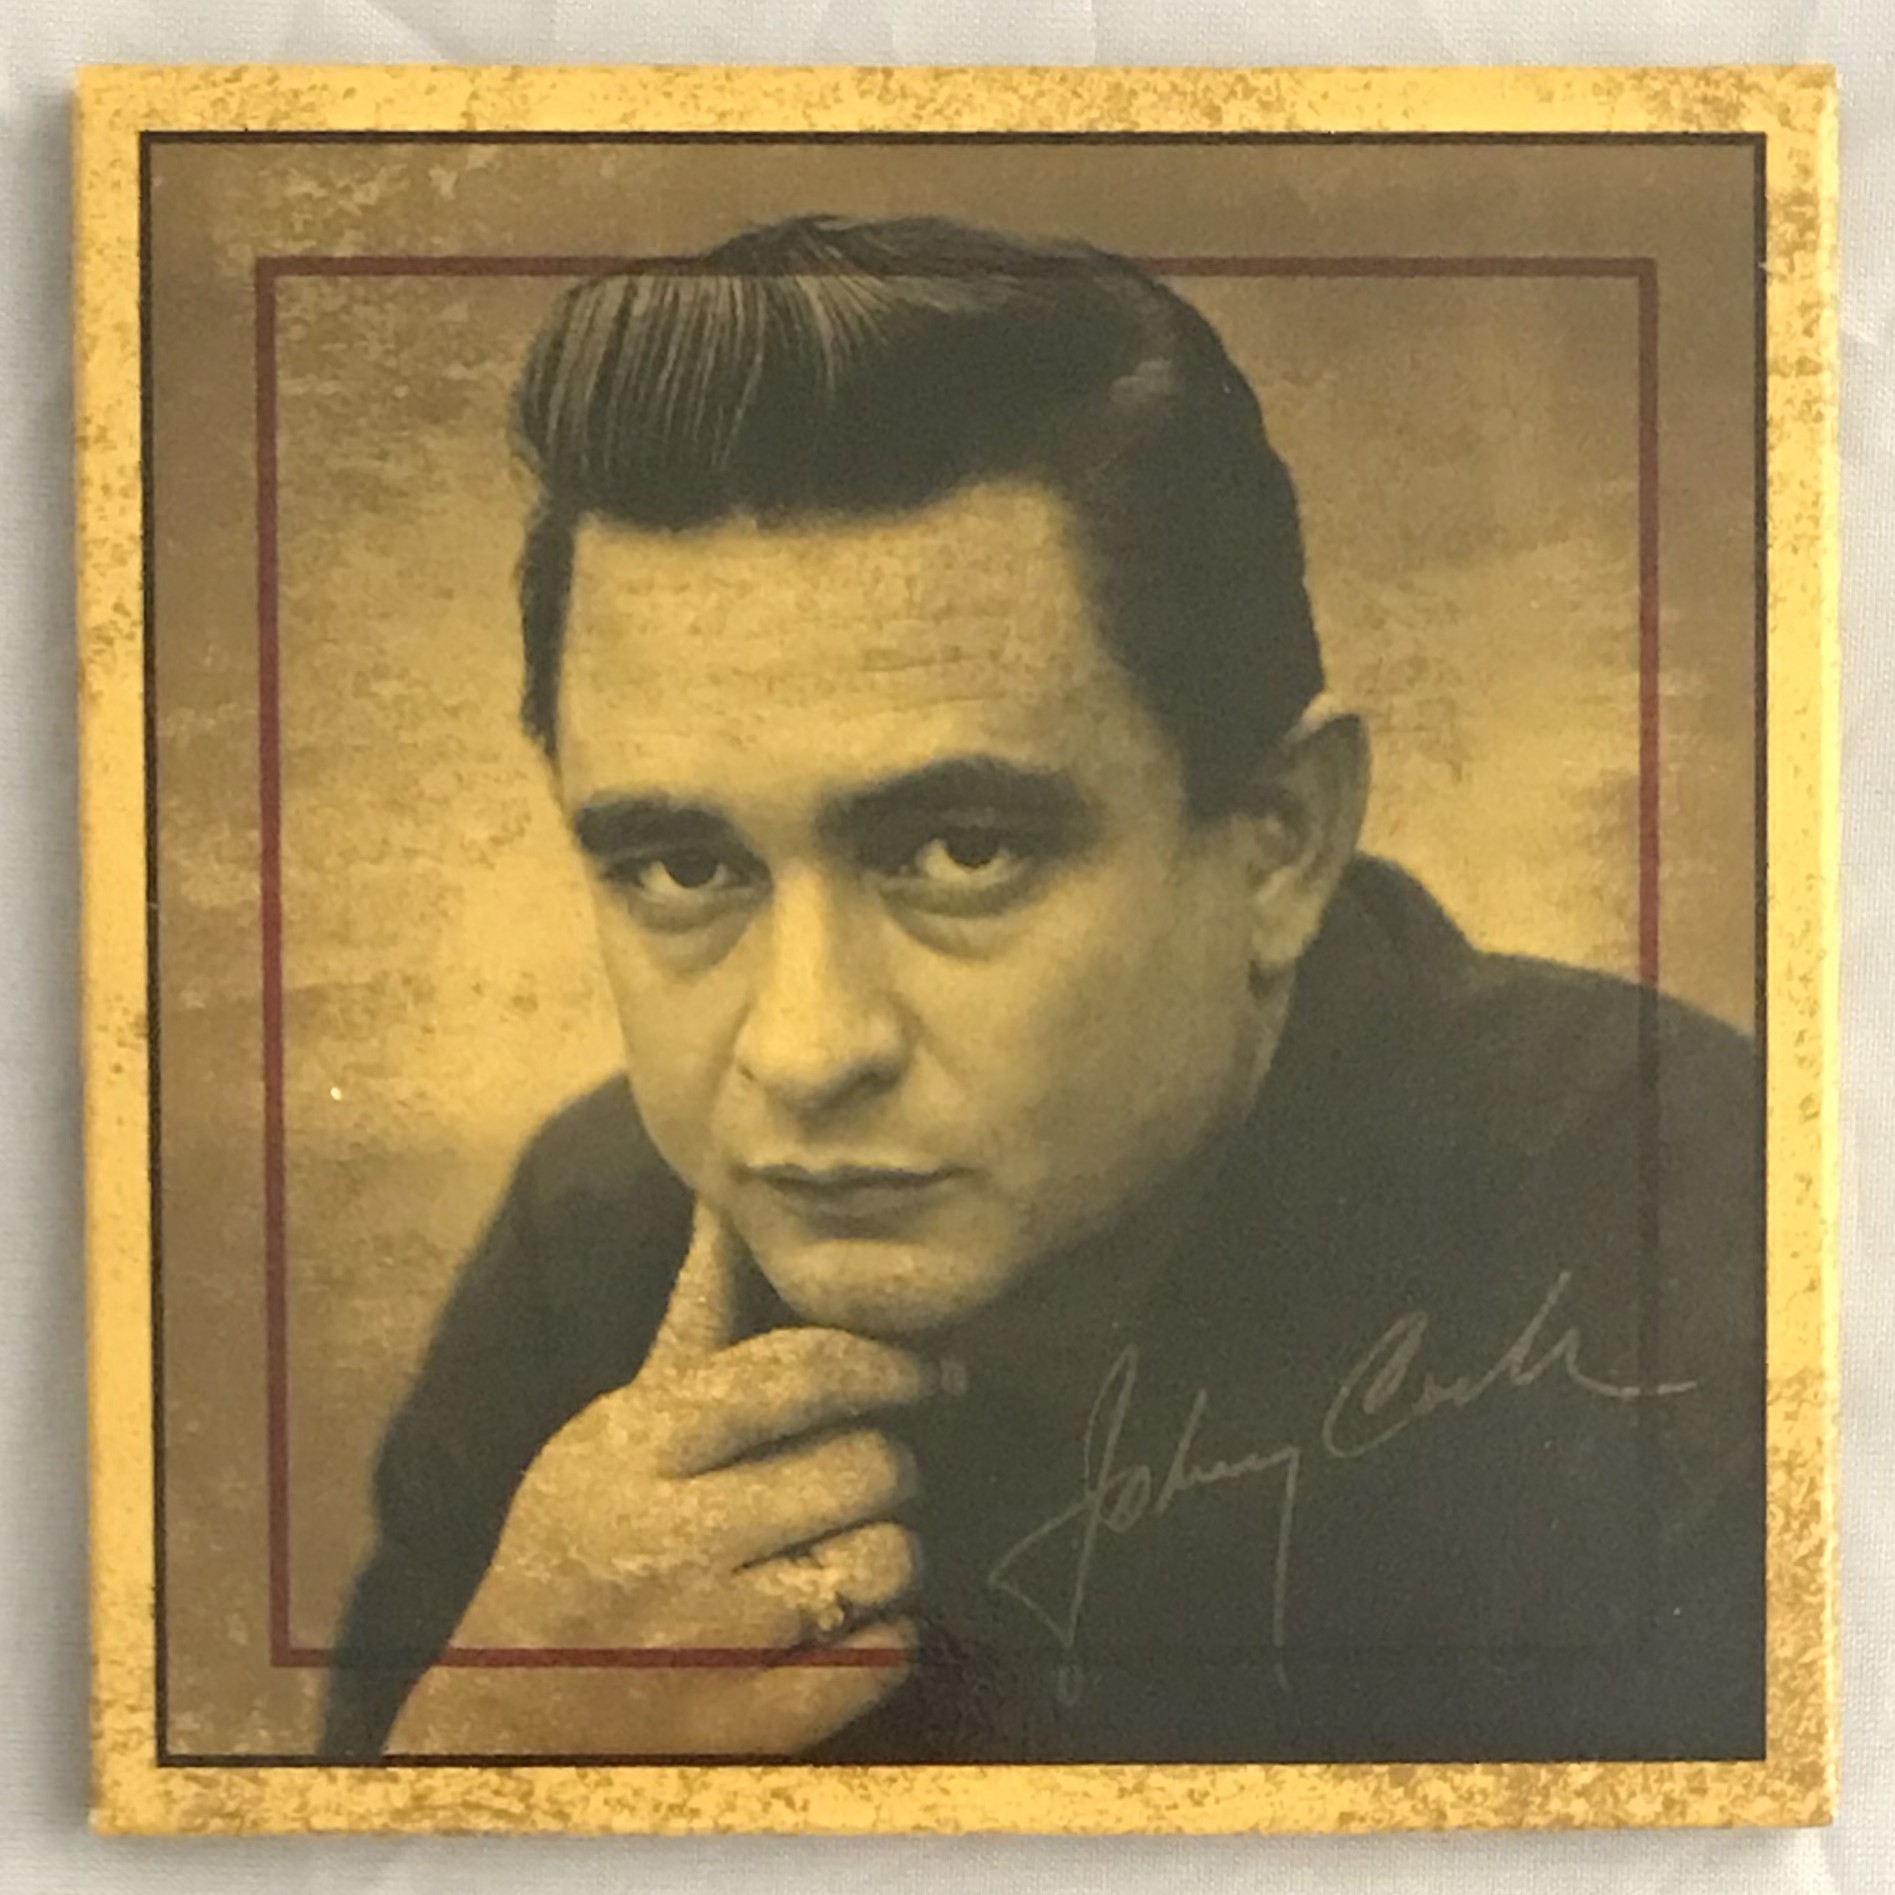 JOHNNY CASH / ジョニー・キャッシュ / CRY CRY CRY (3")